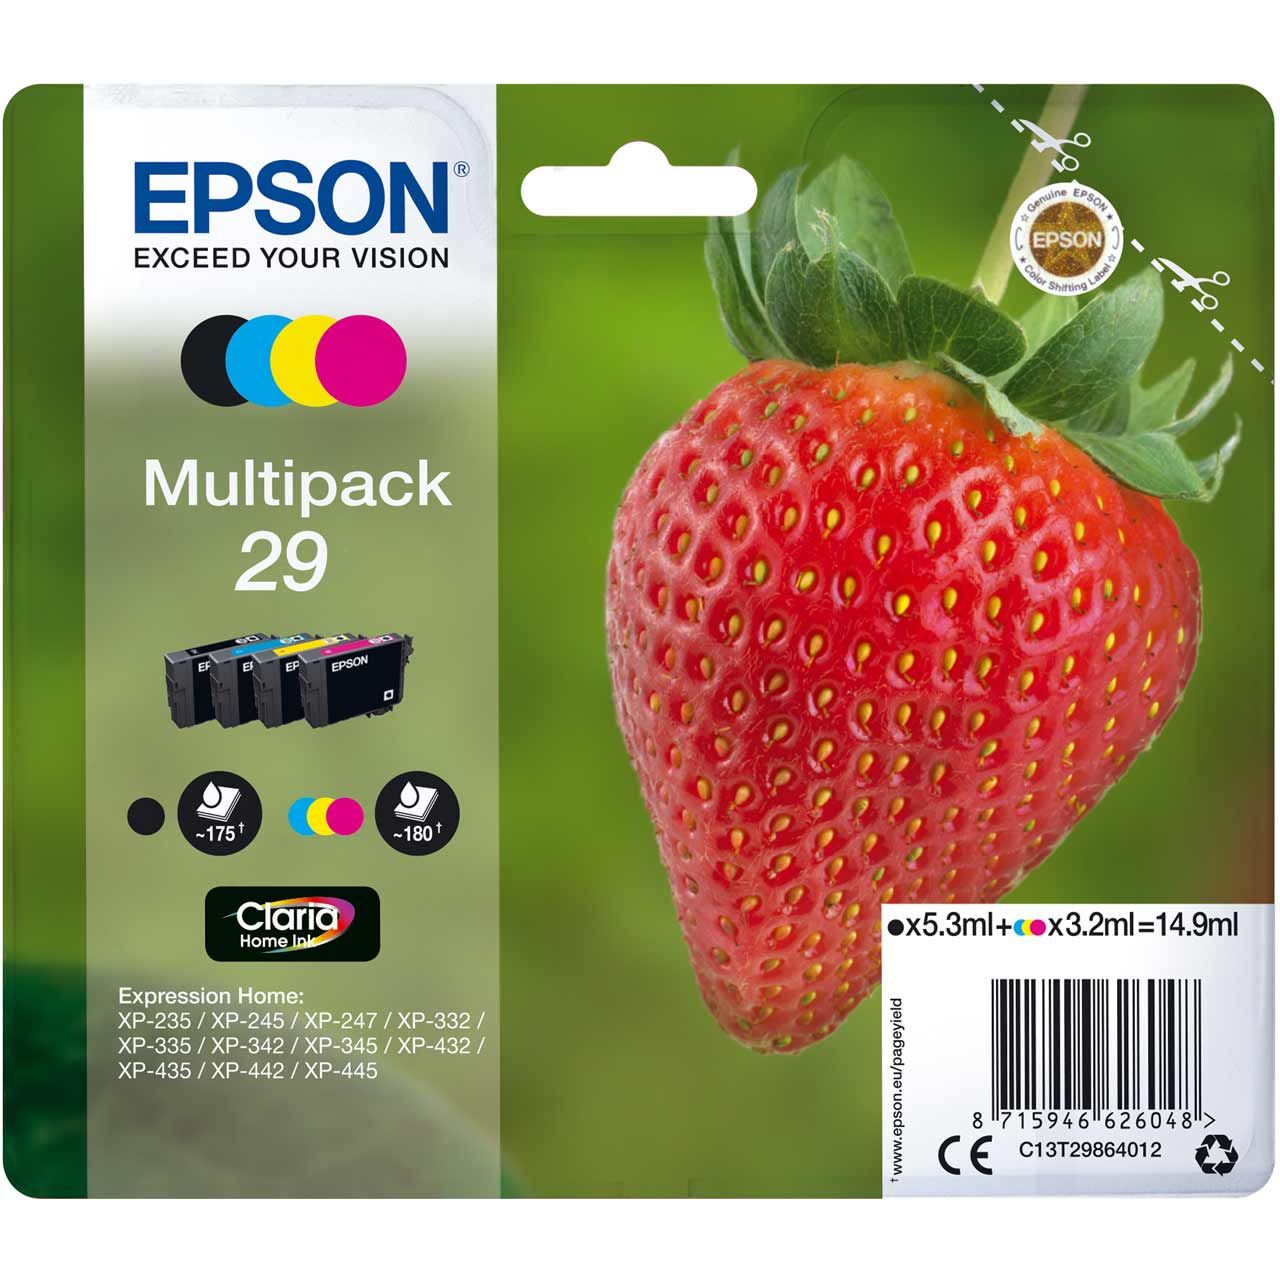 Epson Strawberry Multipack 4-colours 29 Claria Home Ink Cartridge Review